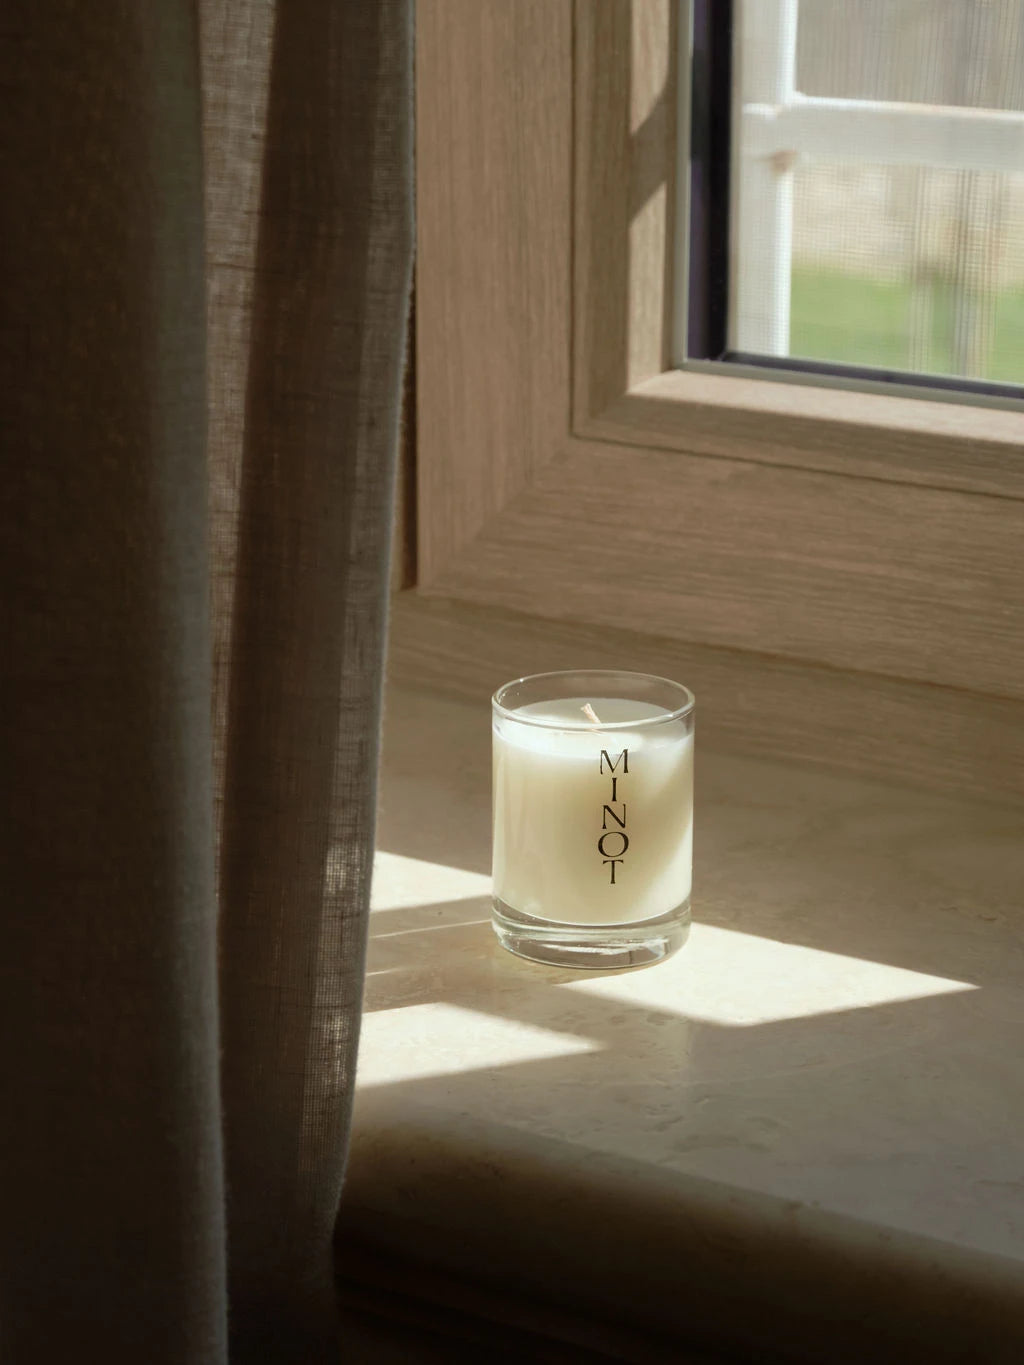 Made with non-toxic ingredients, the Voyage Mini candle is in a window next to a green linen curtain